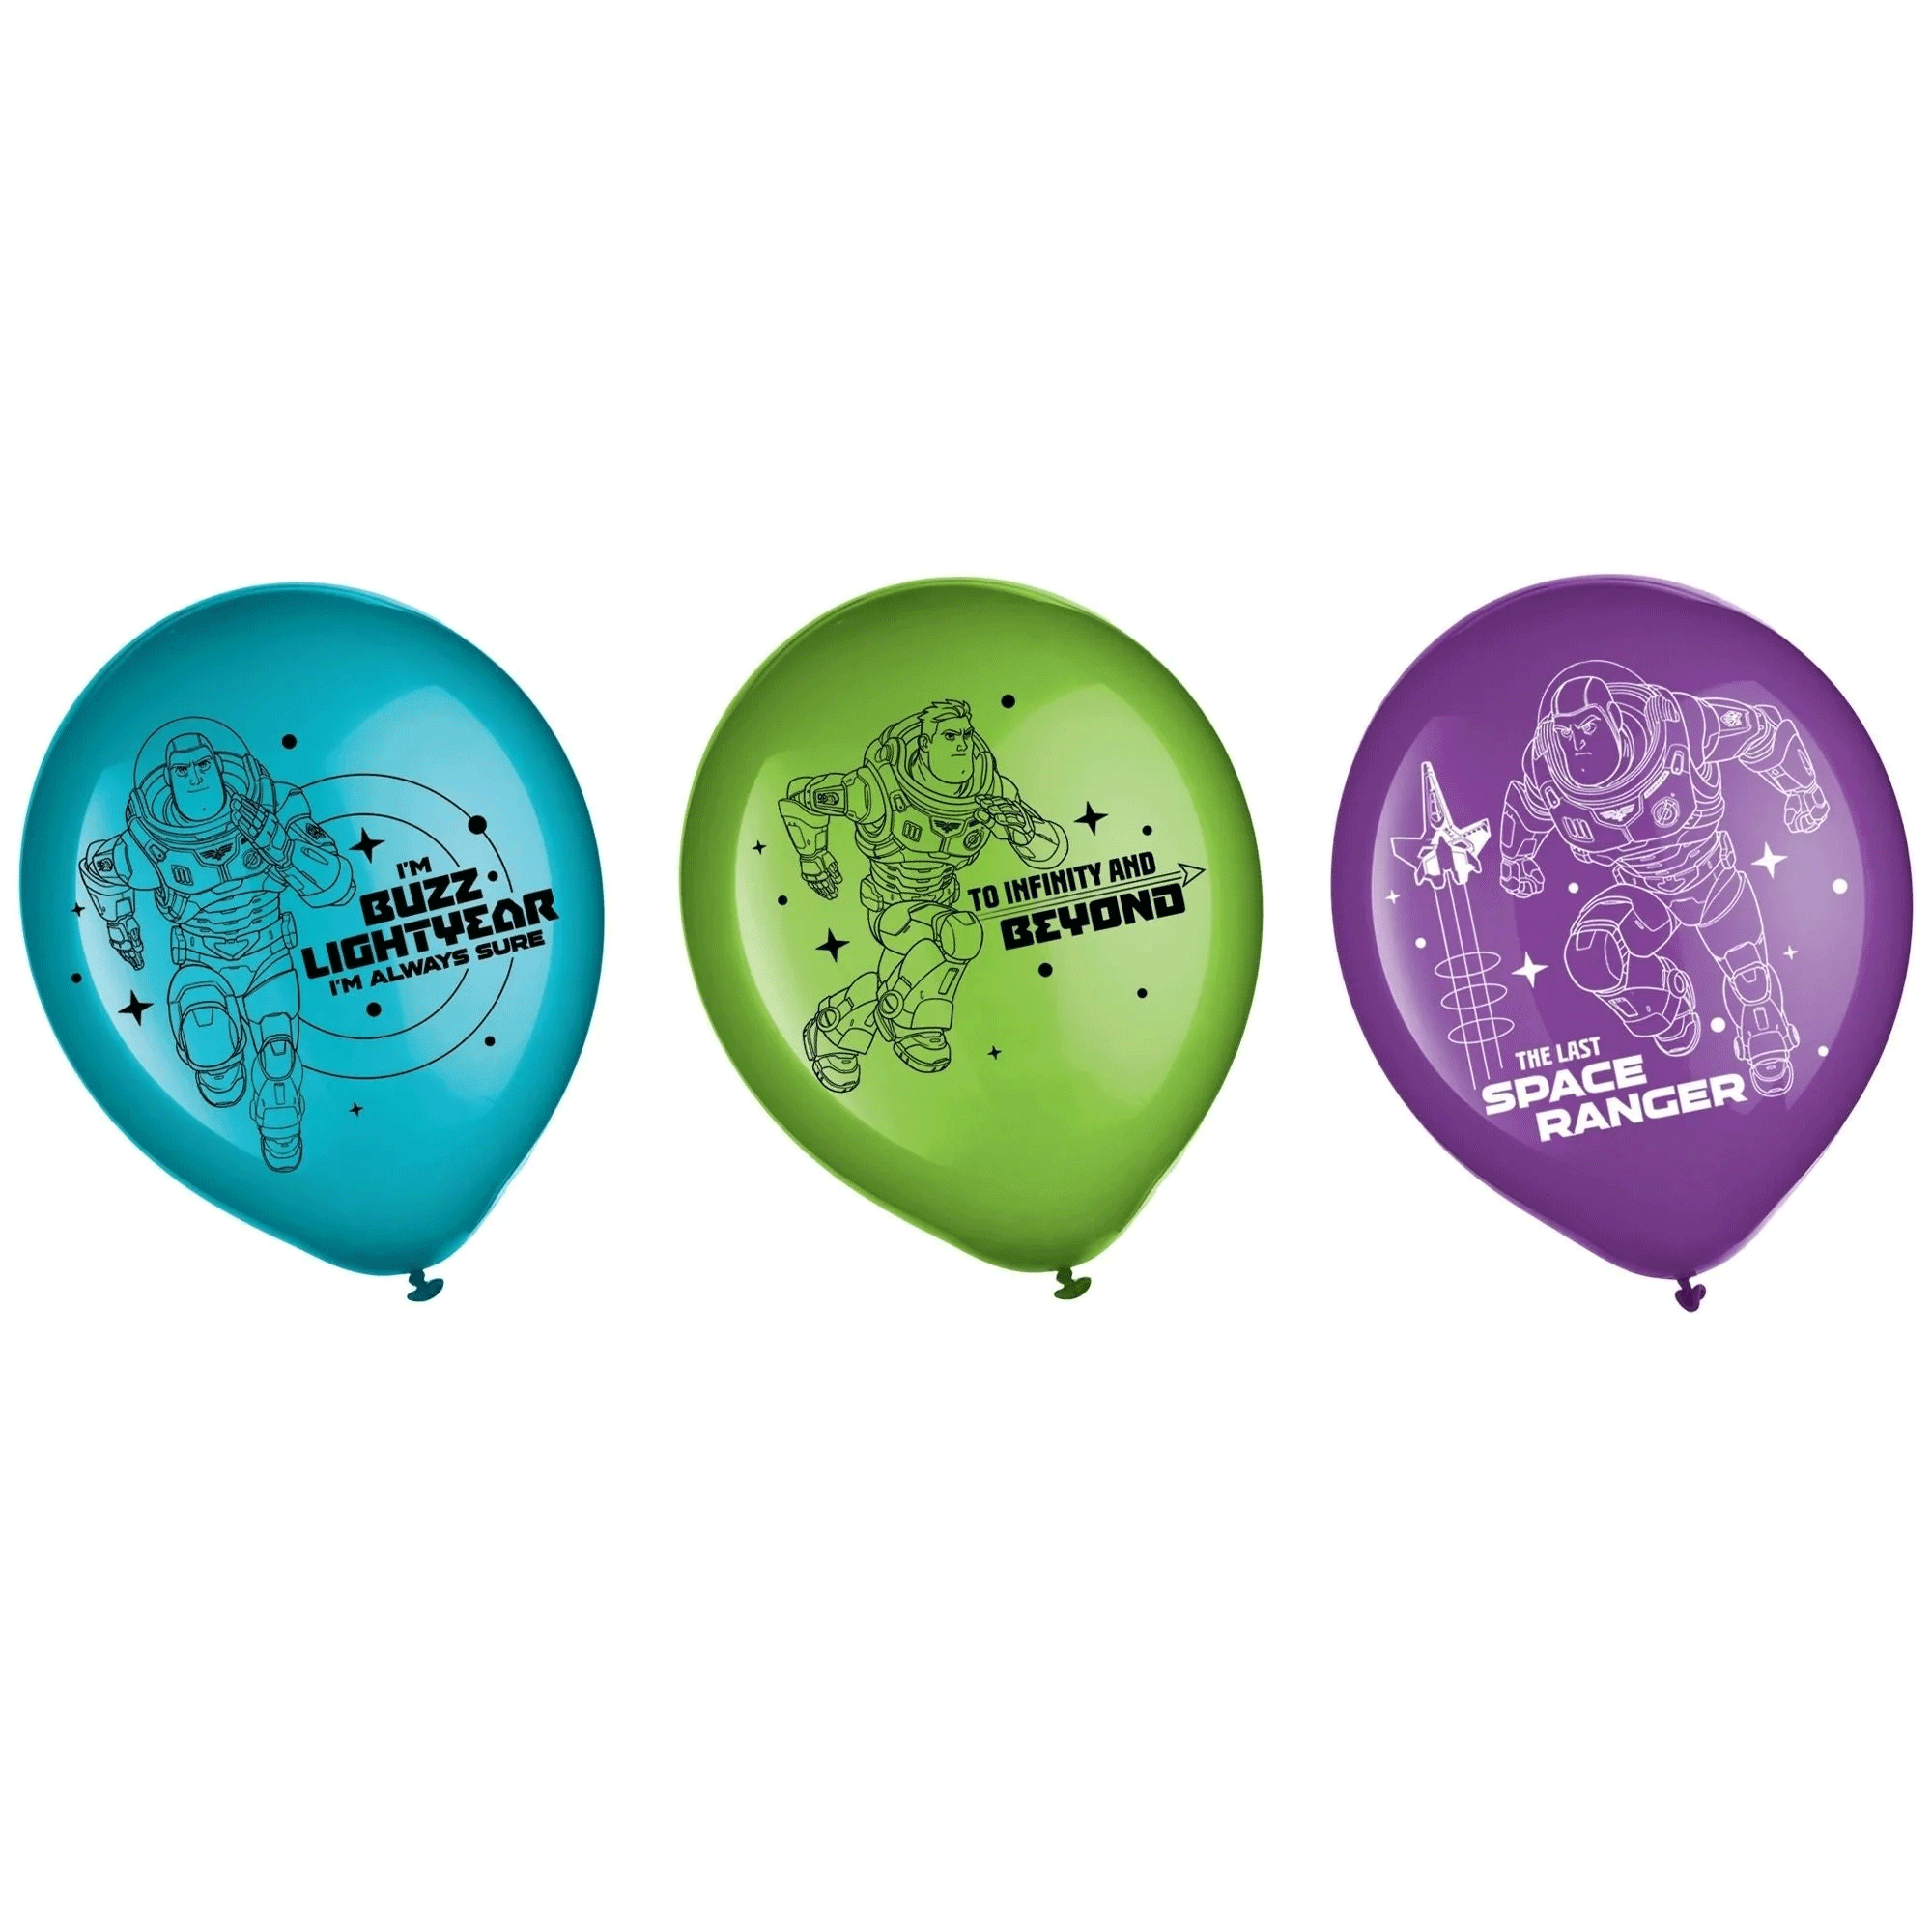 Buzz Lightyear Printed Latex Balloons Assorted 12in, 6pcs